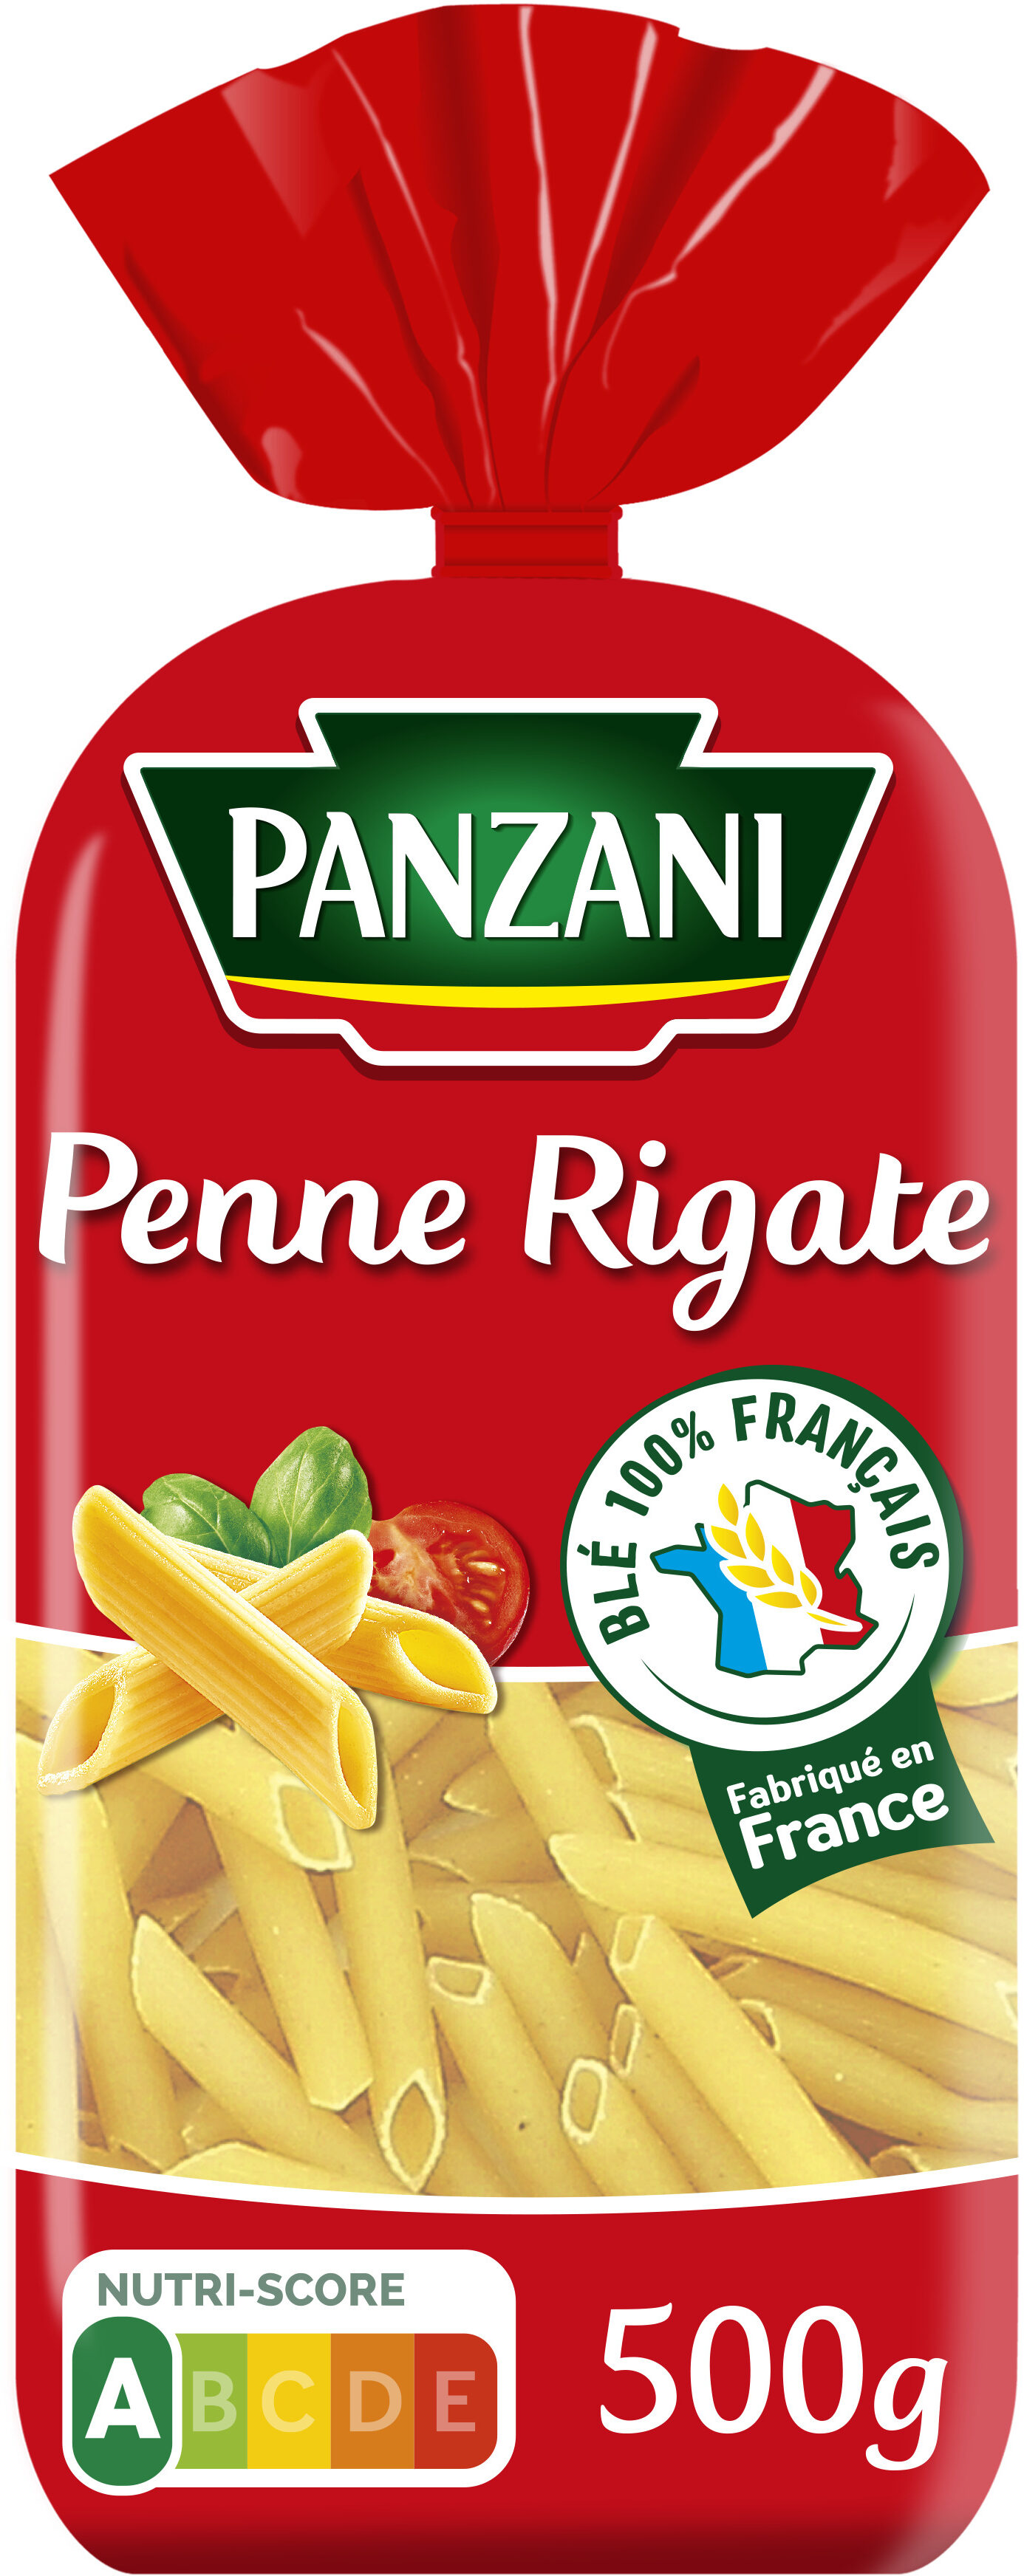 Penne rigate - Producto - fr